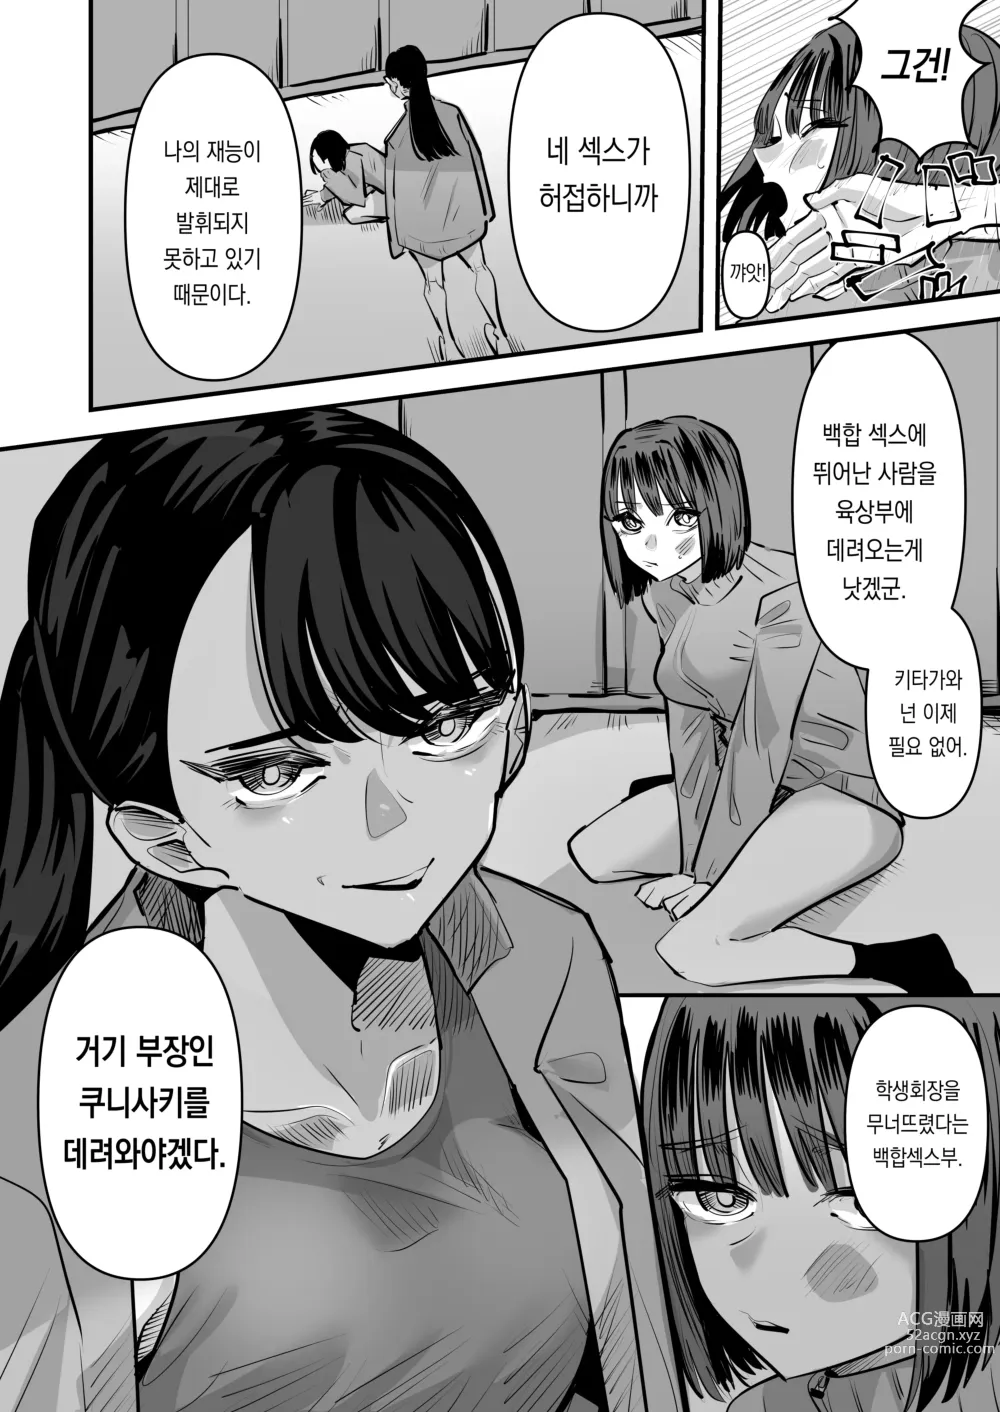 Page 6 of doujinshi 육상부VS백합섹스부